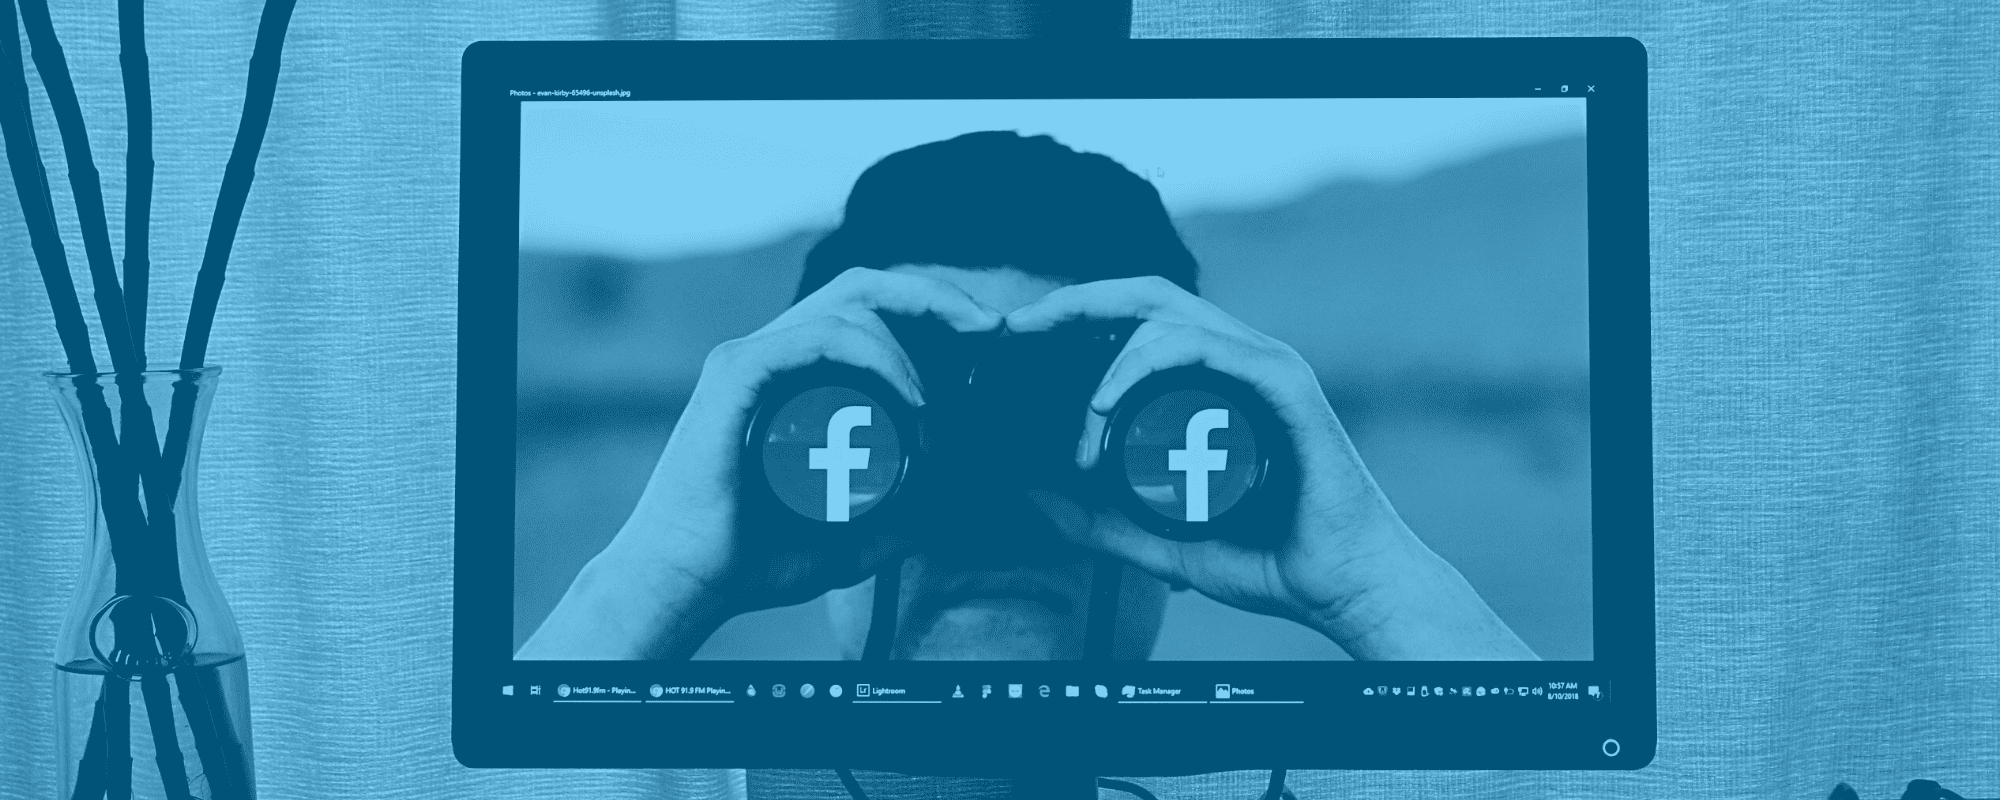 Facebook As A Metaverse Company: Implications For The Events Industry